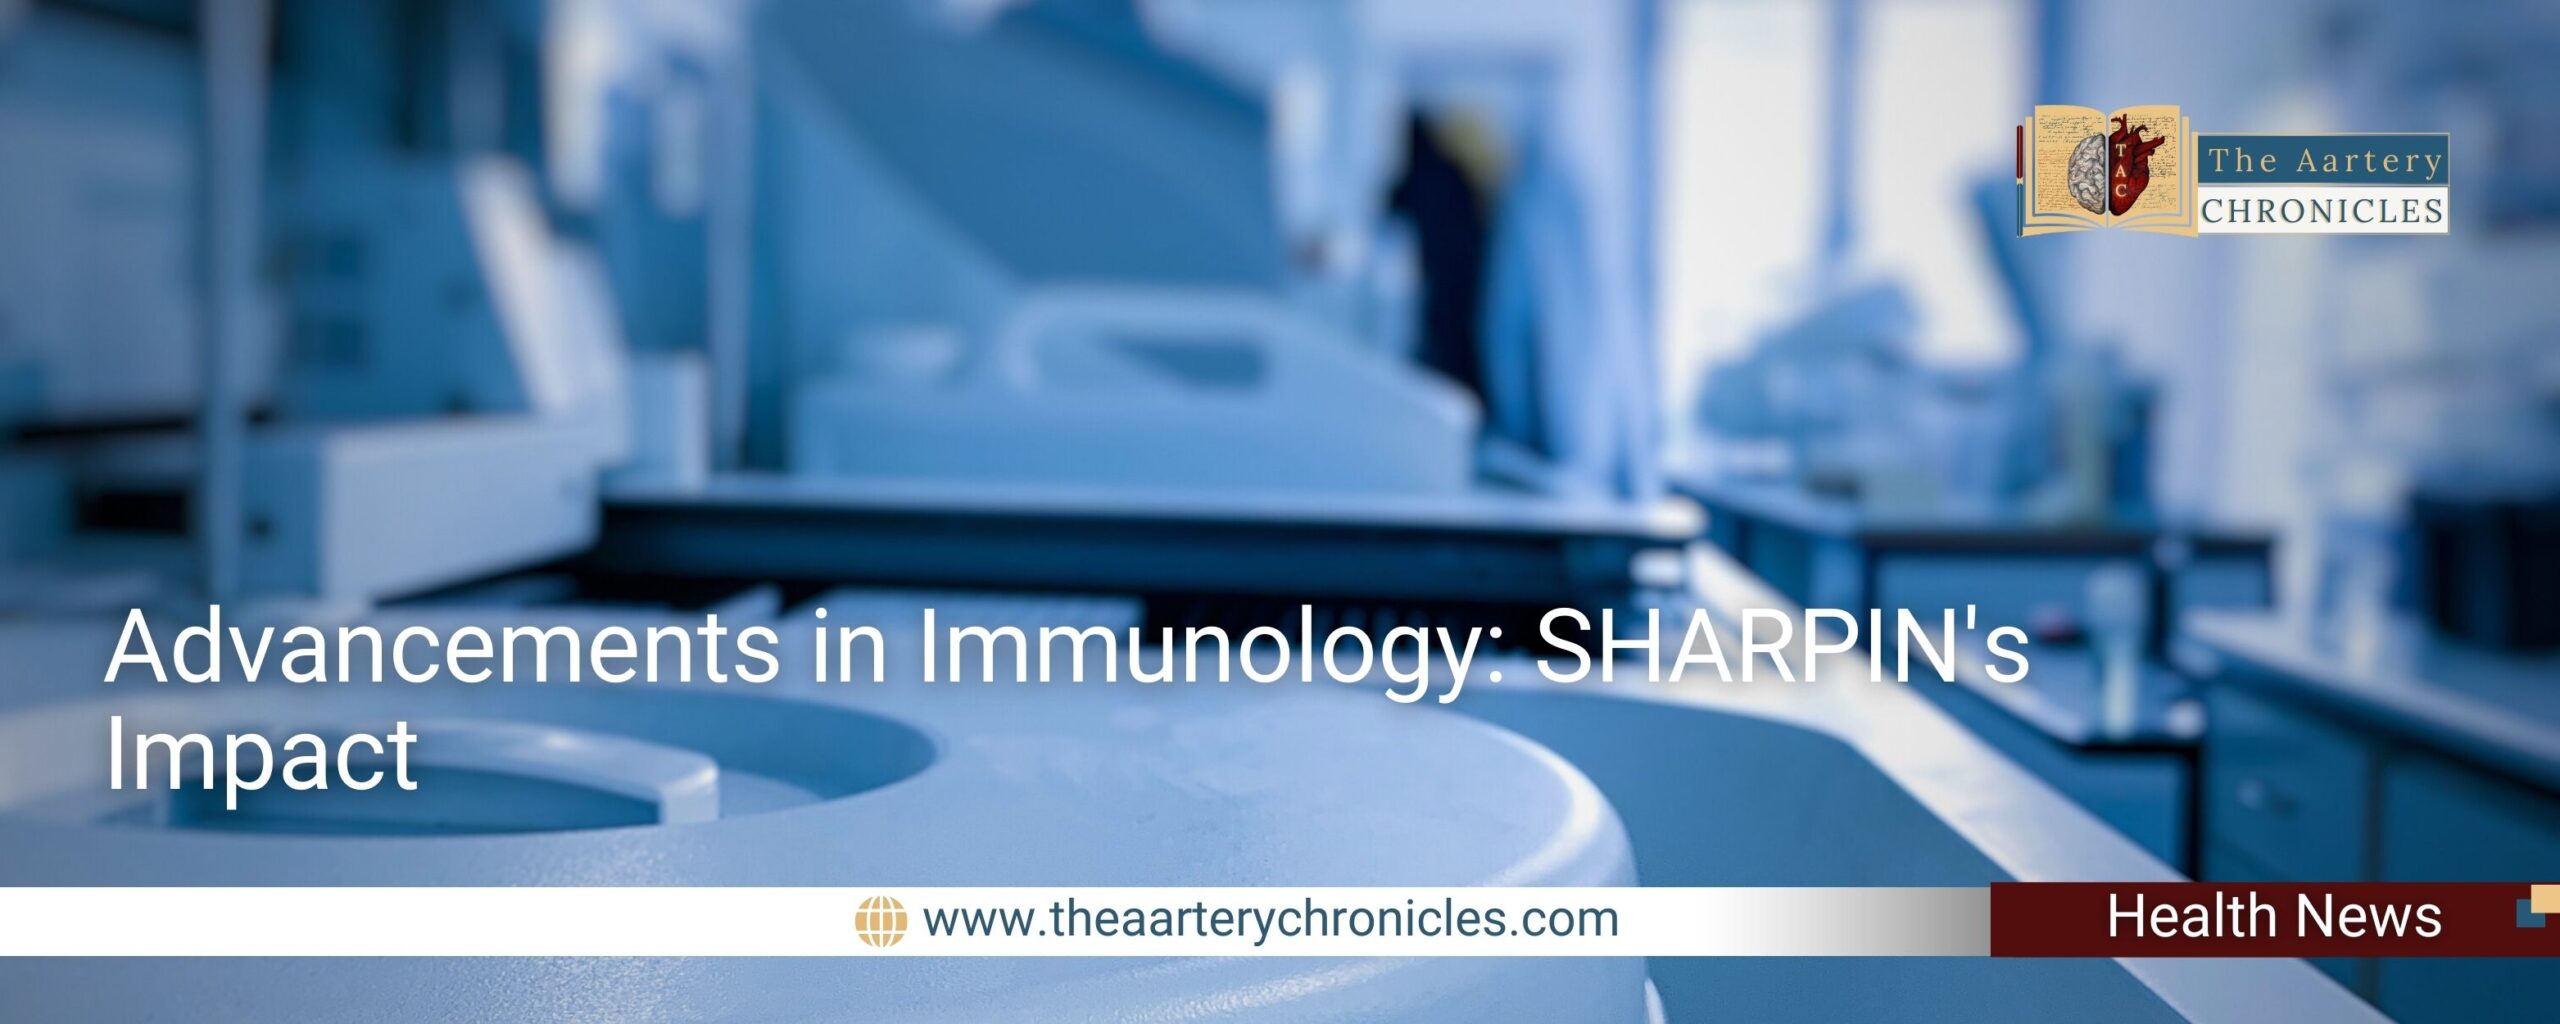 advancement-in-immunology-sharpin's-impact-the-aartery-chronicles-tac